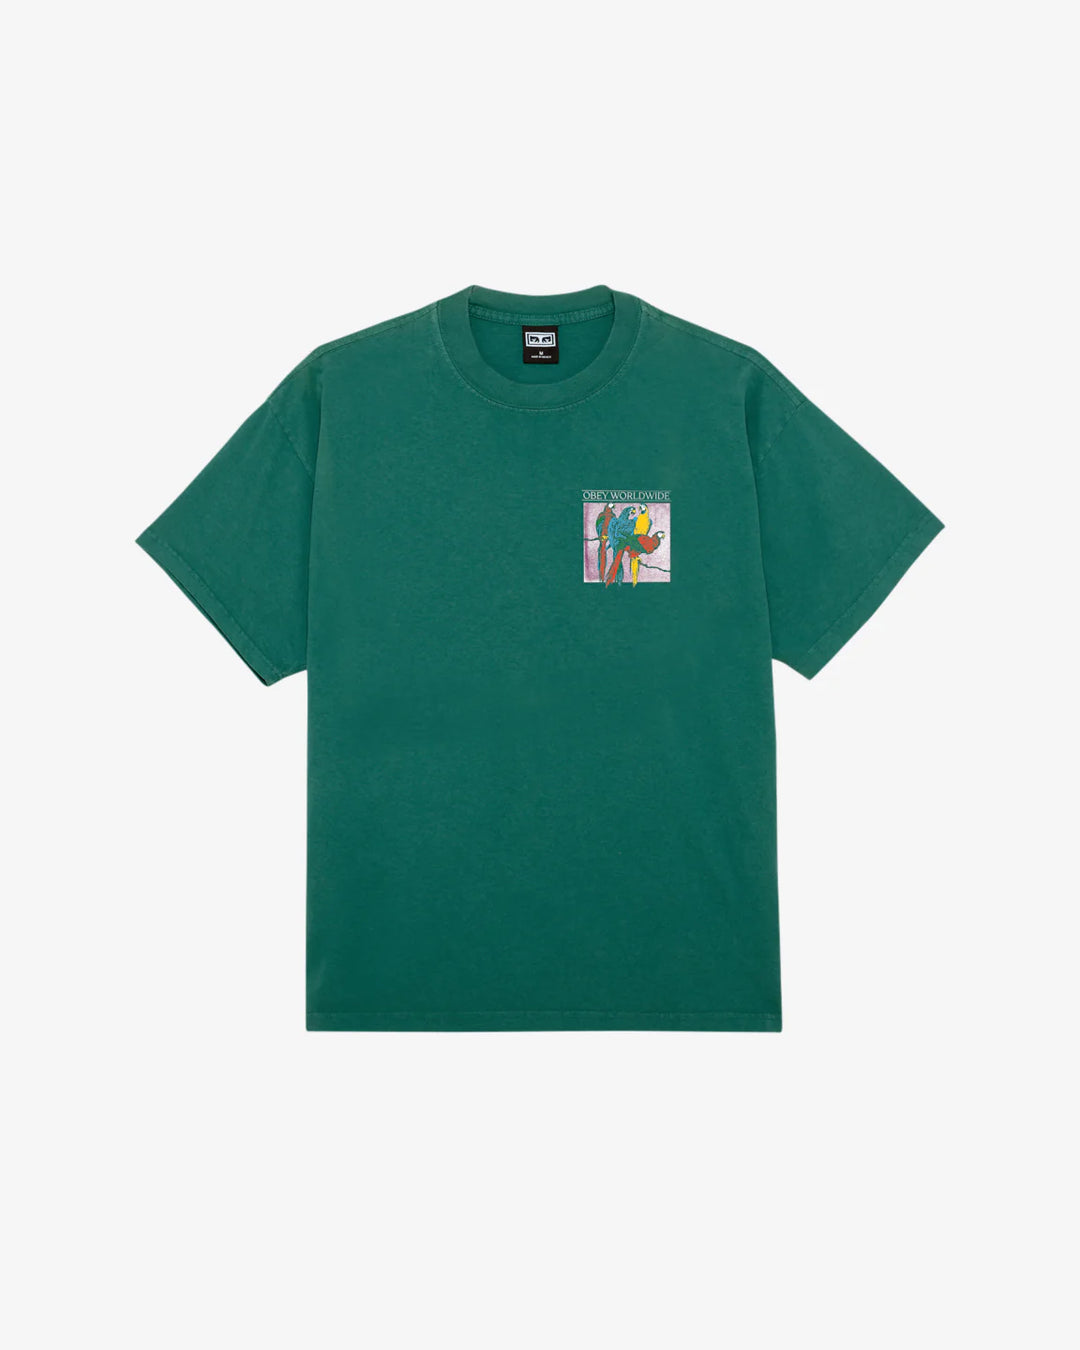 Obey RESPECT & PROTECT HEAVYWEIGHT T-SHIRT - ADVENTURE GREEN - Sun Diego Boardshop